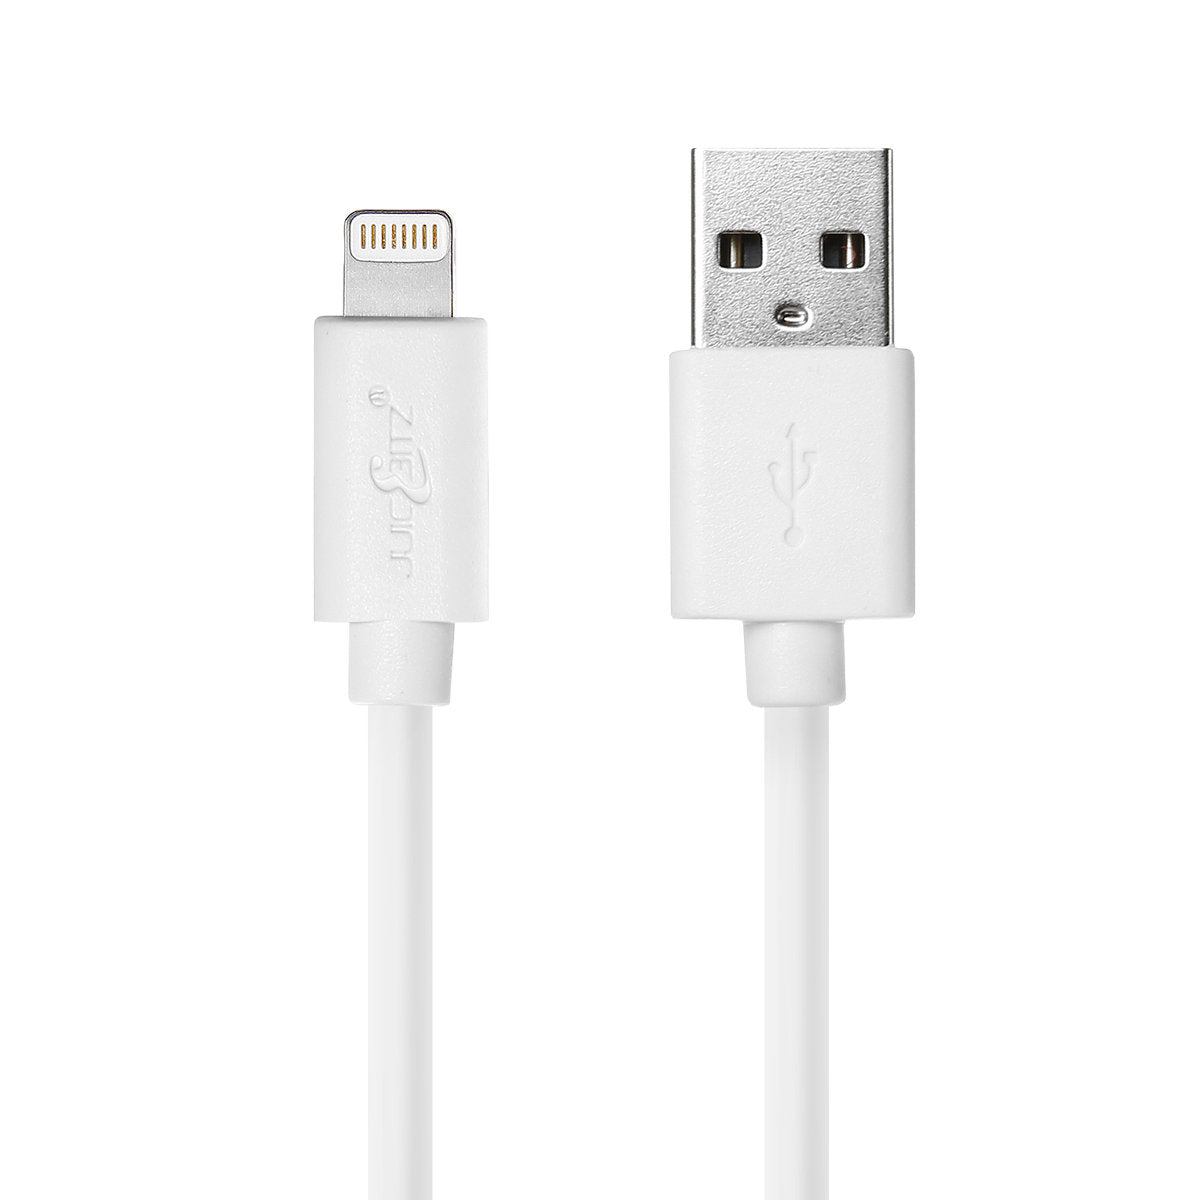 USB Charger Cable Data Sync Lead for iPhone, iPad, iPod - White